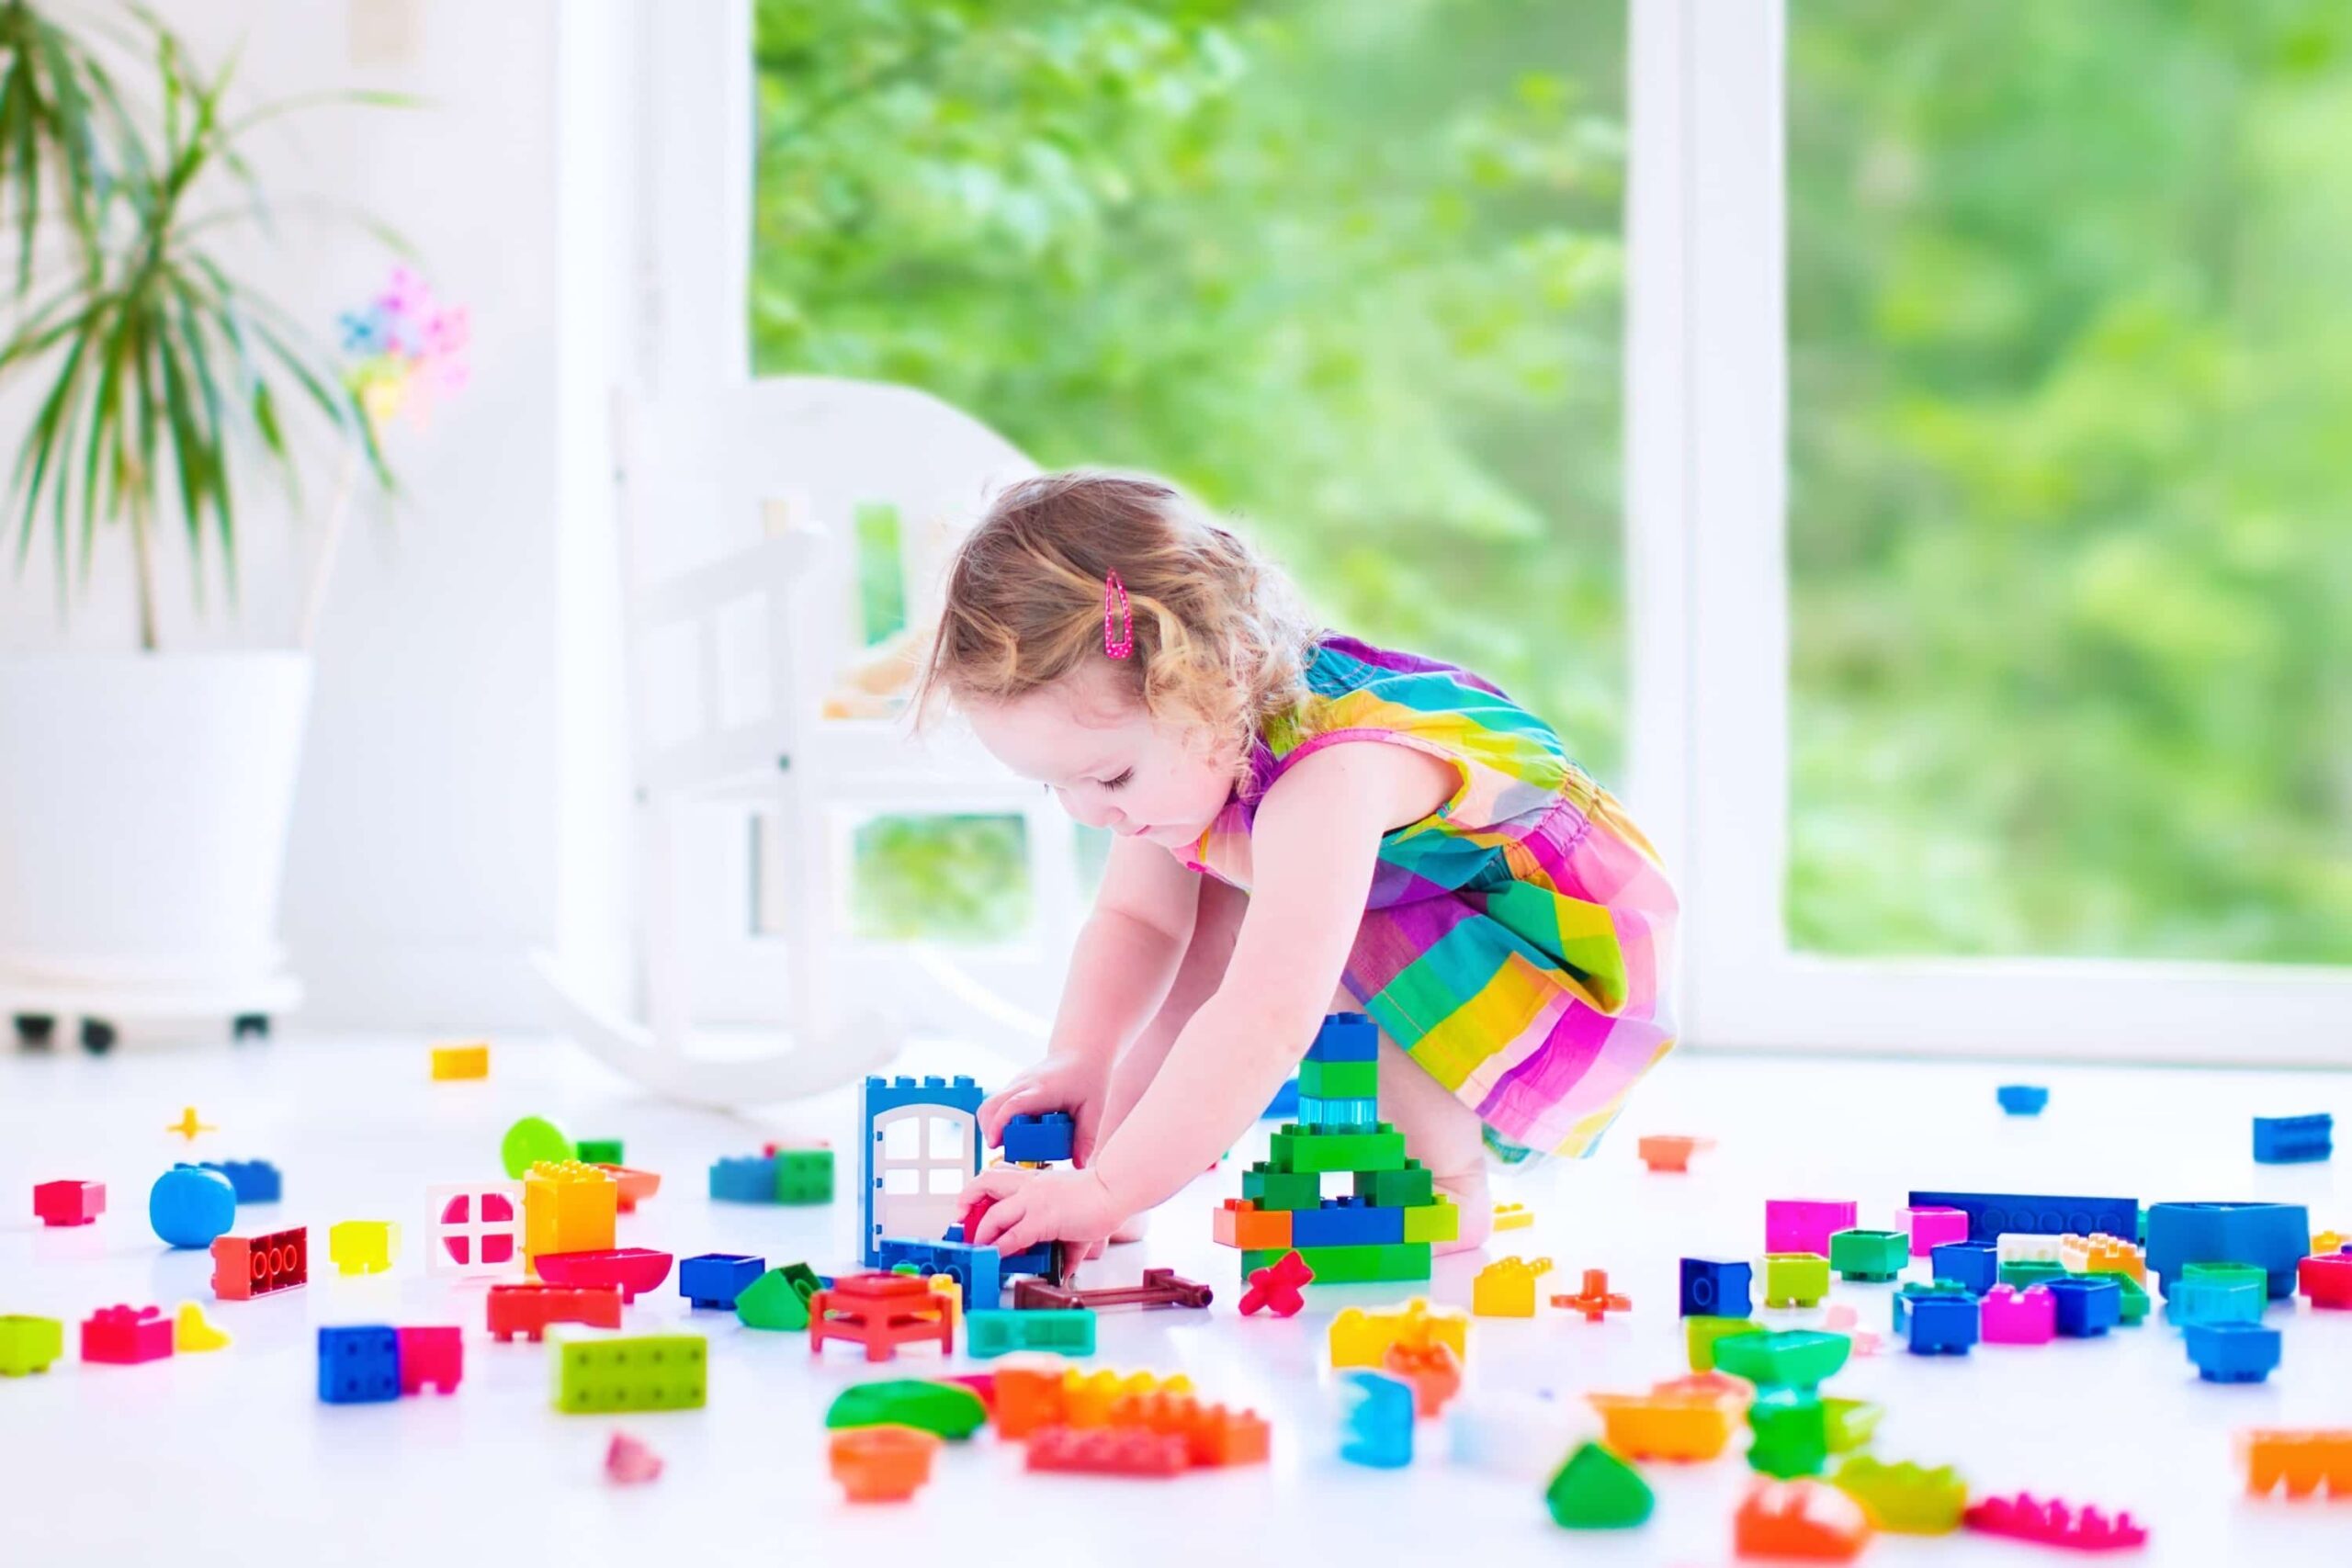 If you're a parent of young kids, it's easy to feel like toys are taking over your life. Moreover, it's difficult to consistently get your children to clean up. Click here to get a number of tips on getting your children to clean up including the simplest more effective tip of all. Parenting, kids, toddlers, preschoolers, scaffolding, developmental psychology